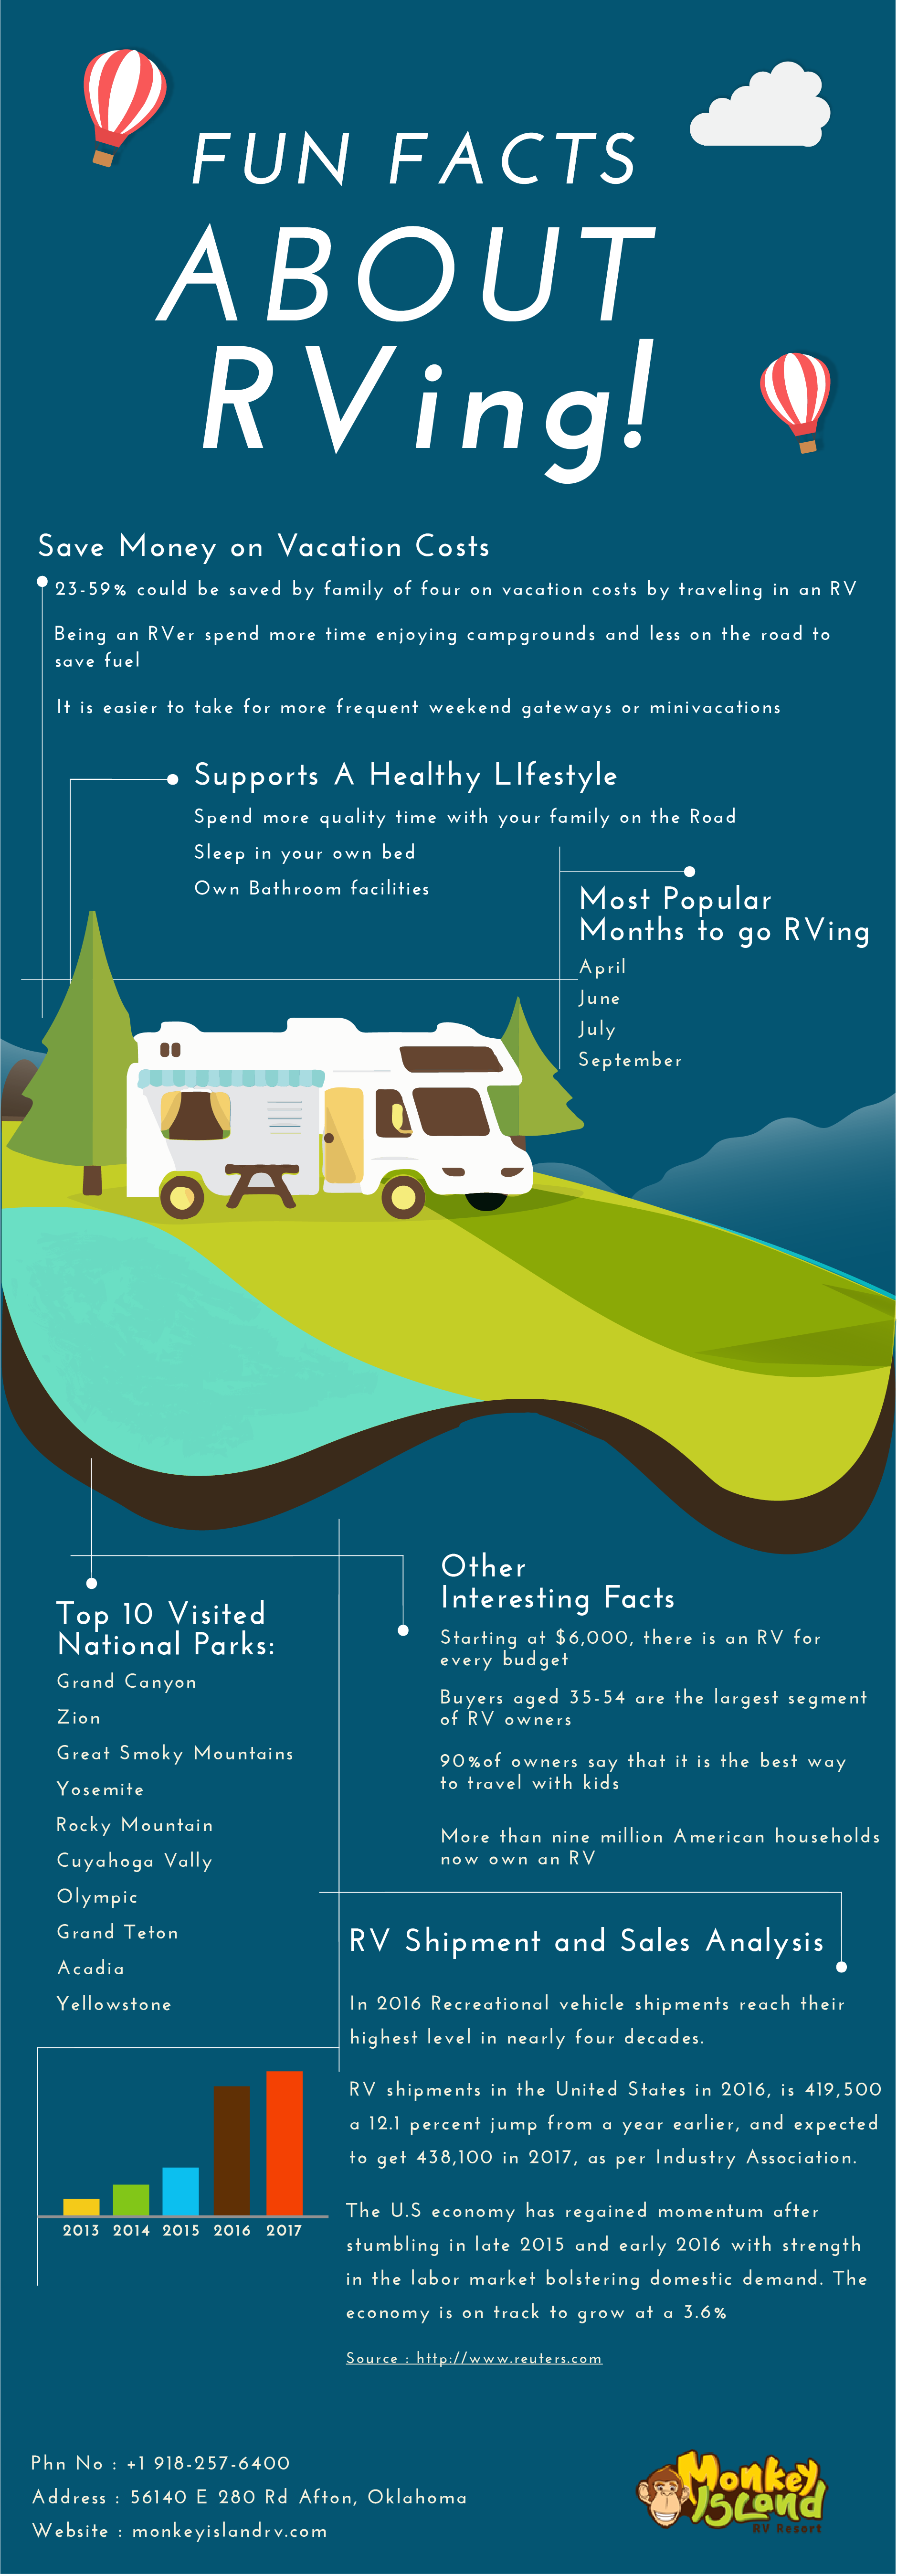 Fun Facts About RVing!